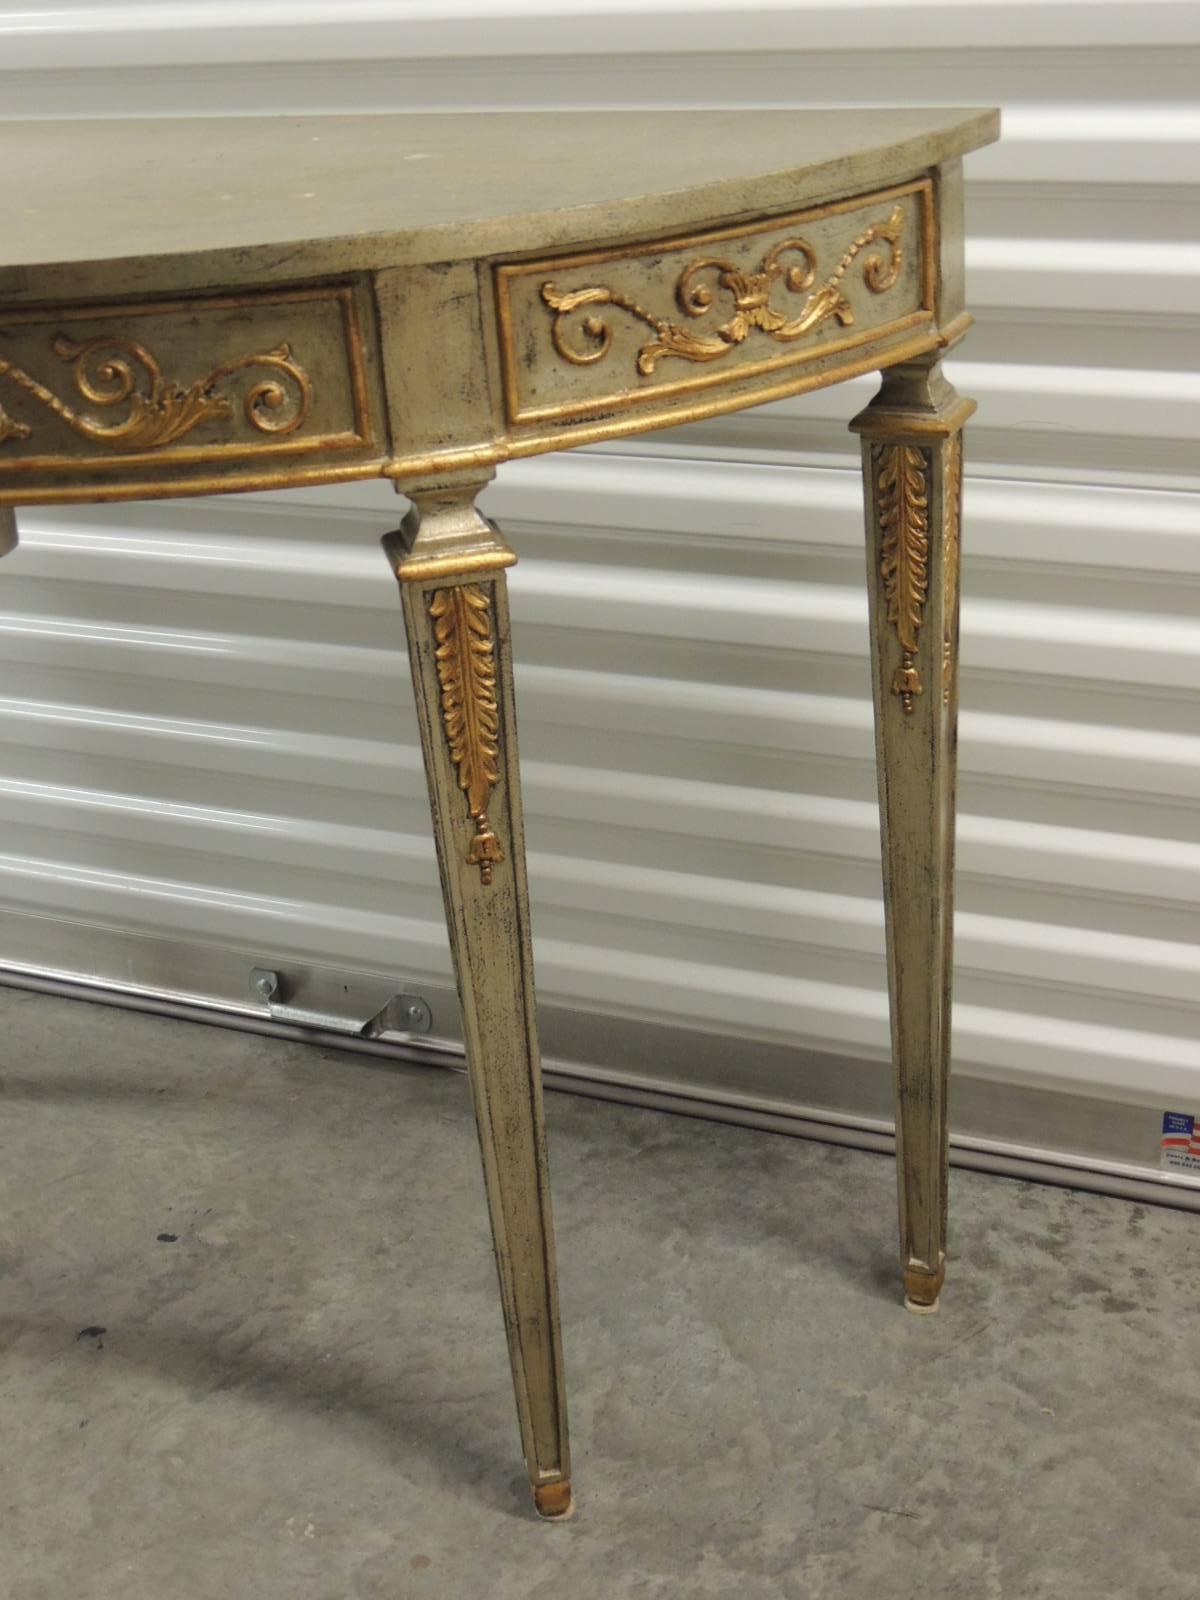 Antique Textiles Galleries:
Maitland-Smith demilune silver leaf and gold accents console table and fluted legs. Scrolling vines, rosette and acanthus leaves’ details all around. Original manufacture brass plaque on the back.
Ideal for an entry hall,